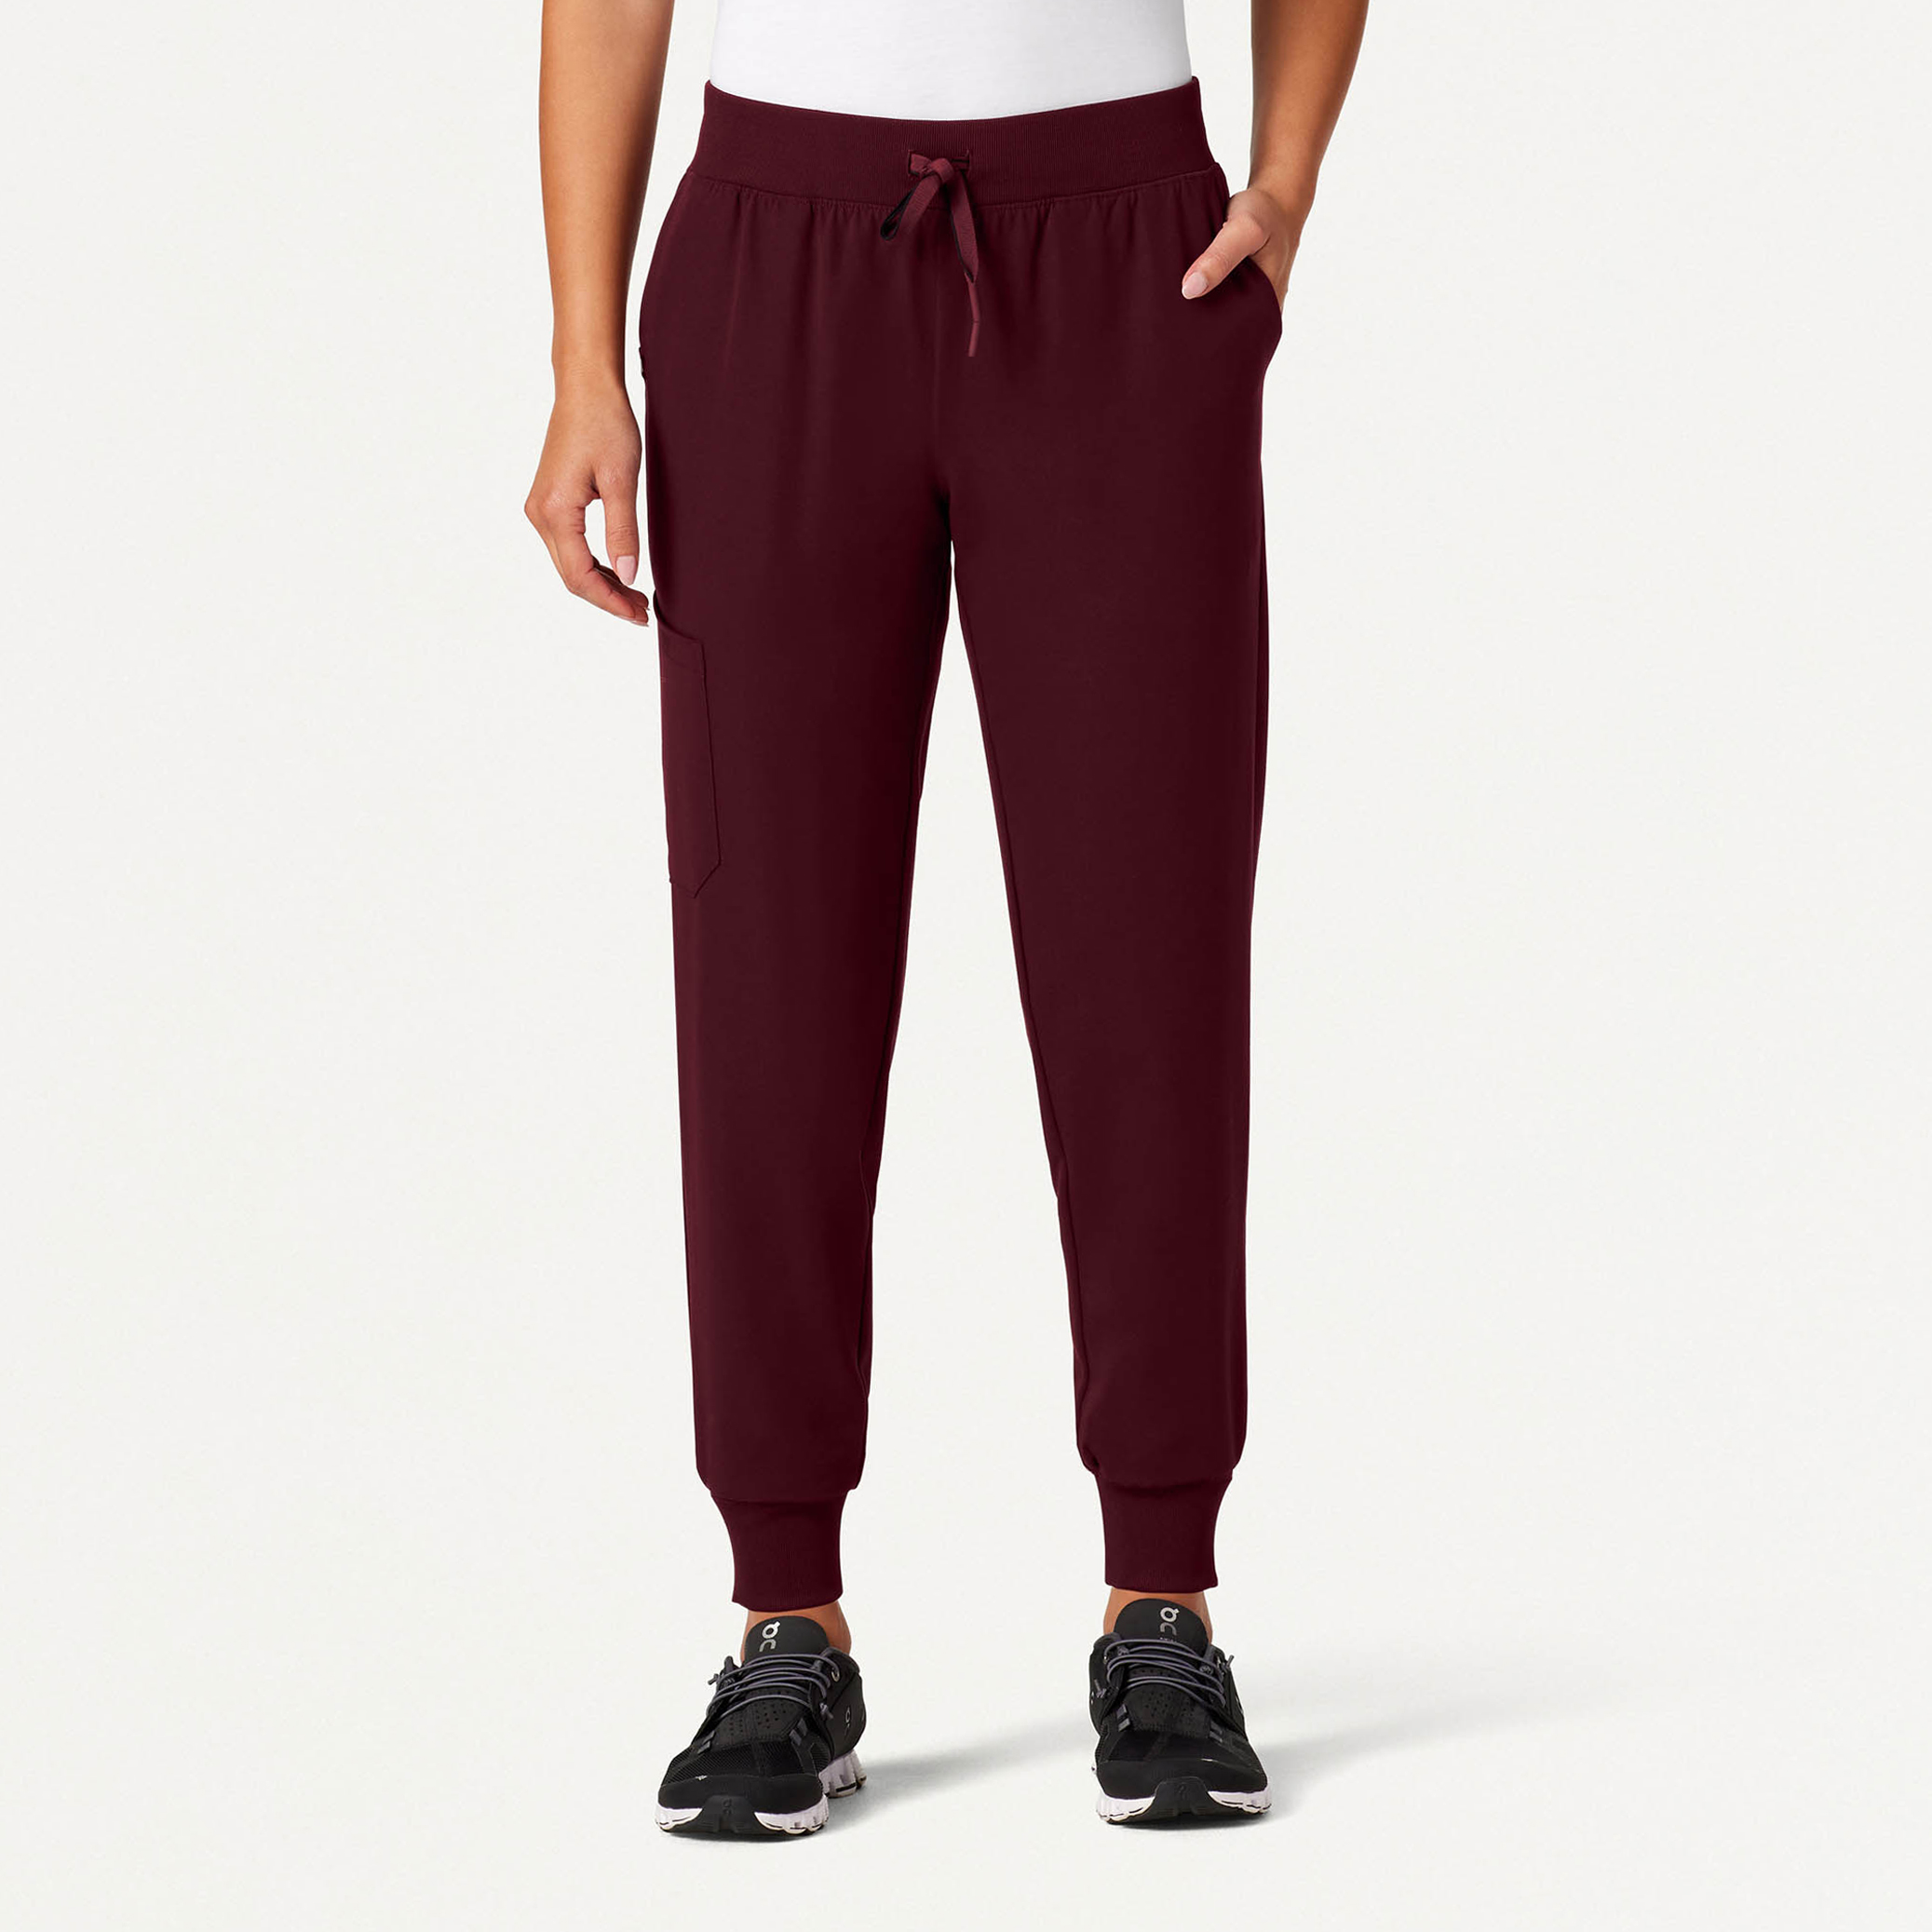 Stylish womens Trousers & Pants / Cigarette Pent for women, Maroon Red Ladies  Pant (Maroon)